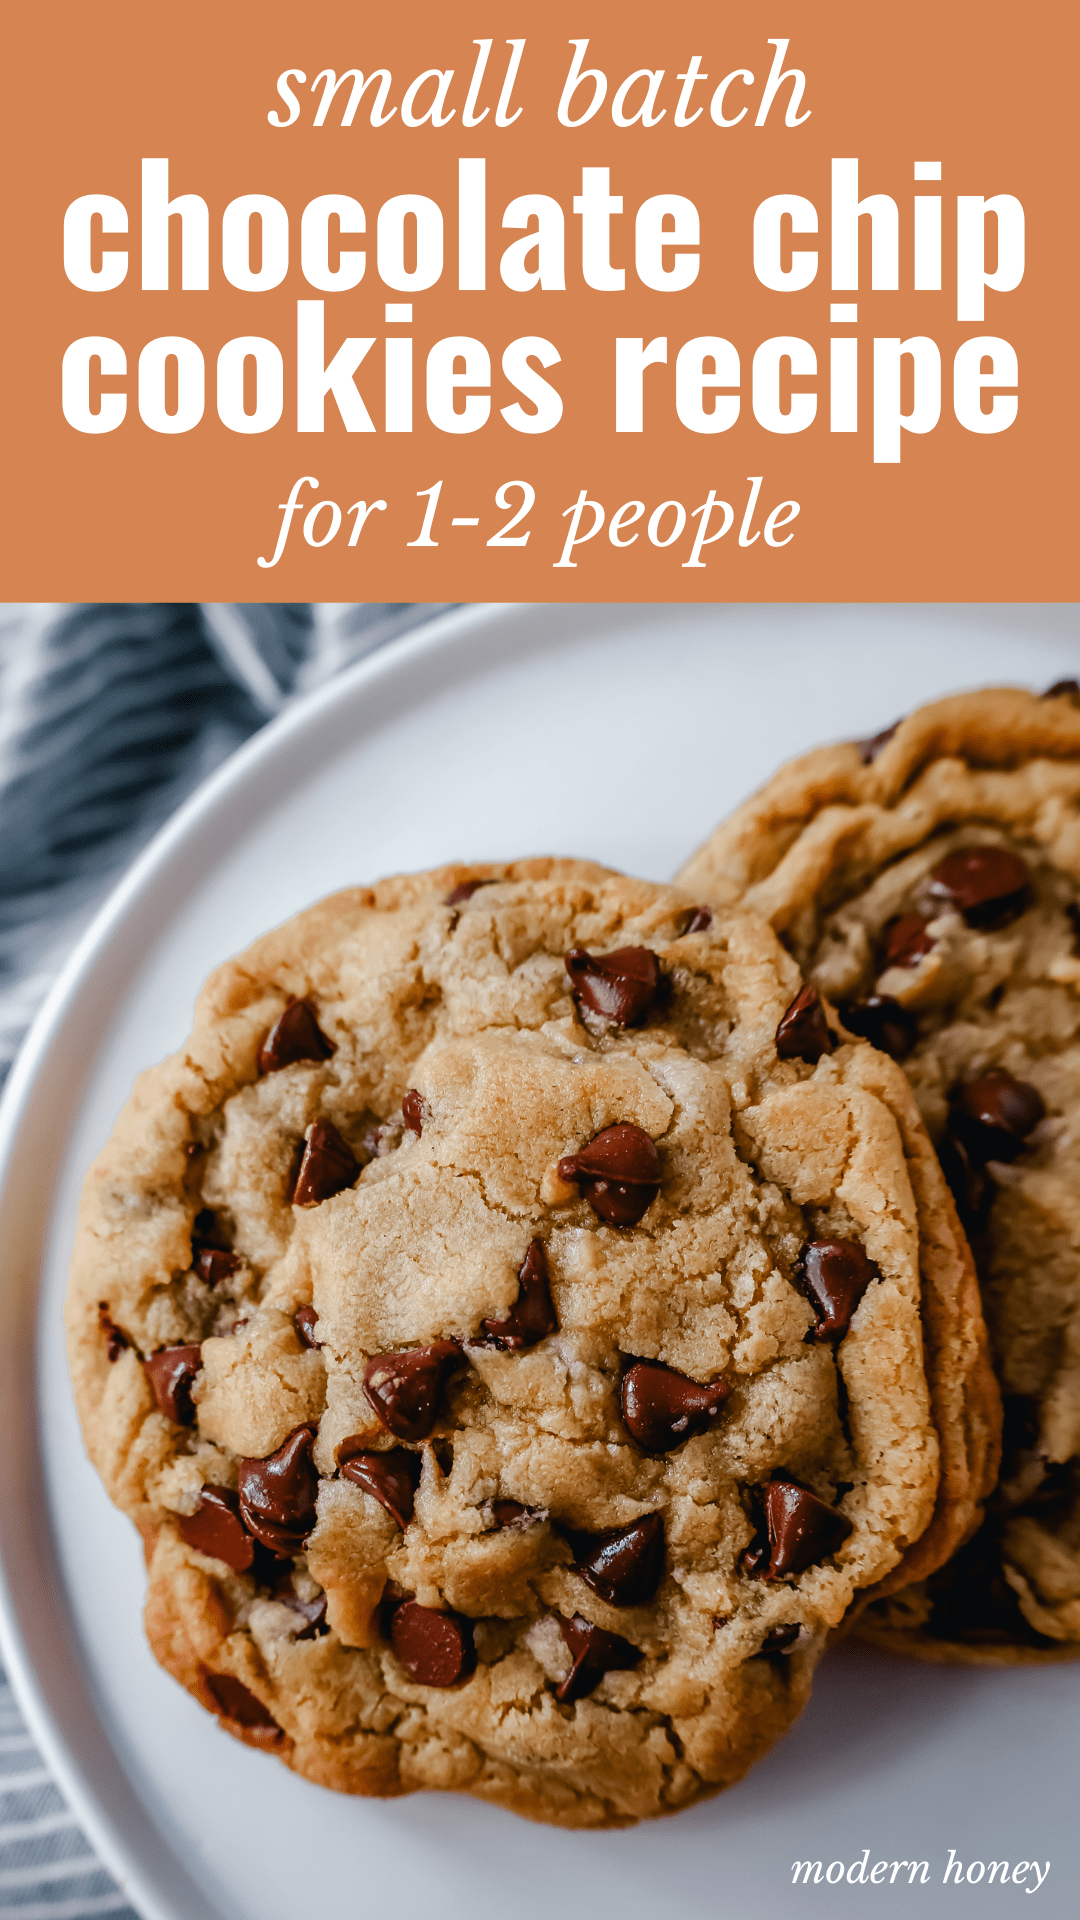 Chocolate Chip Cookie Recipe for Two. A quick and easy 15-minute start to finish chocolate chip cookie recipe for two people. This small-batch cookie recipe yields 2 to 3 cookies so perfect when you are craving cookies but don't want to make a big batch.